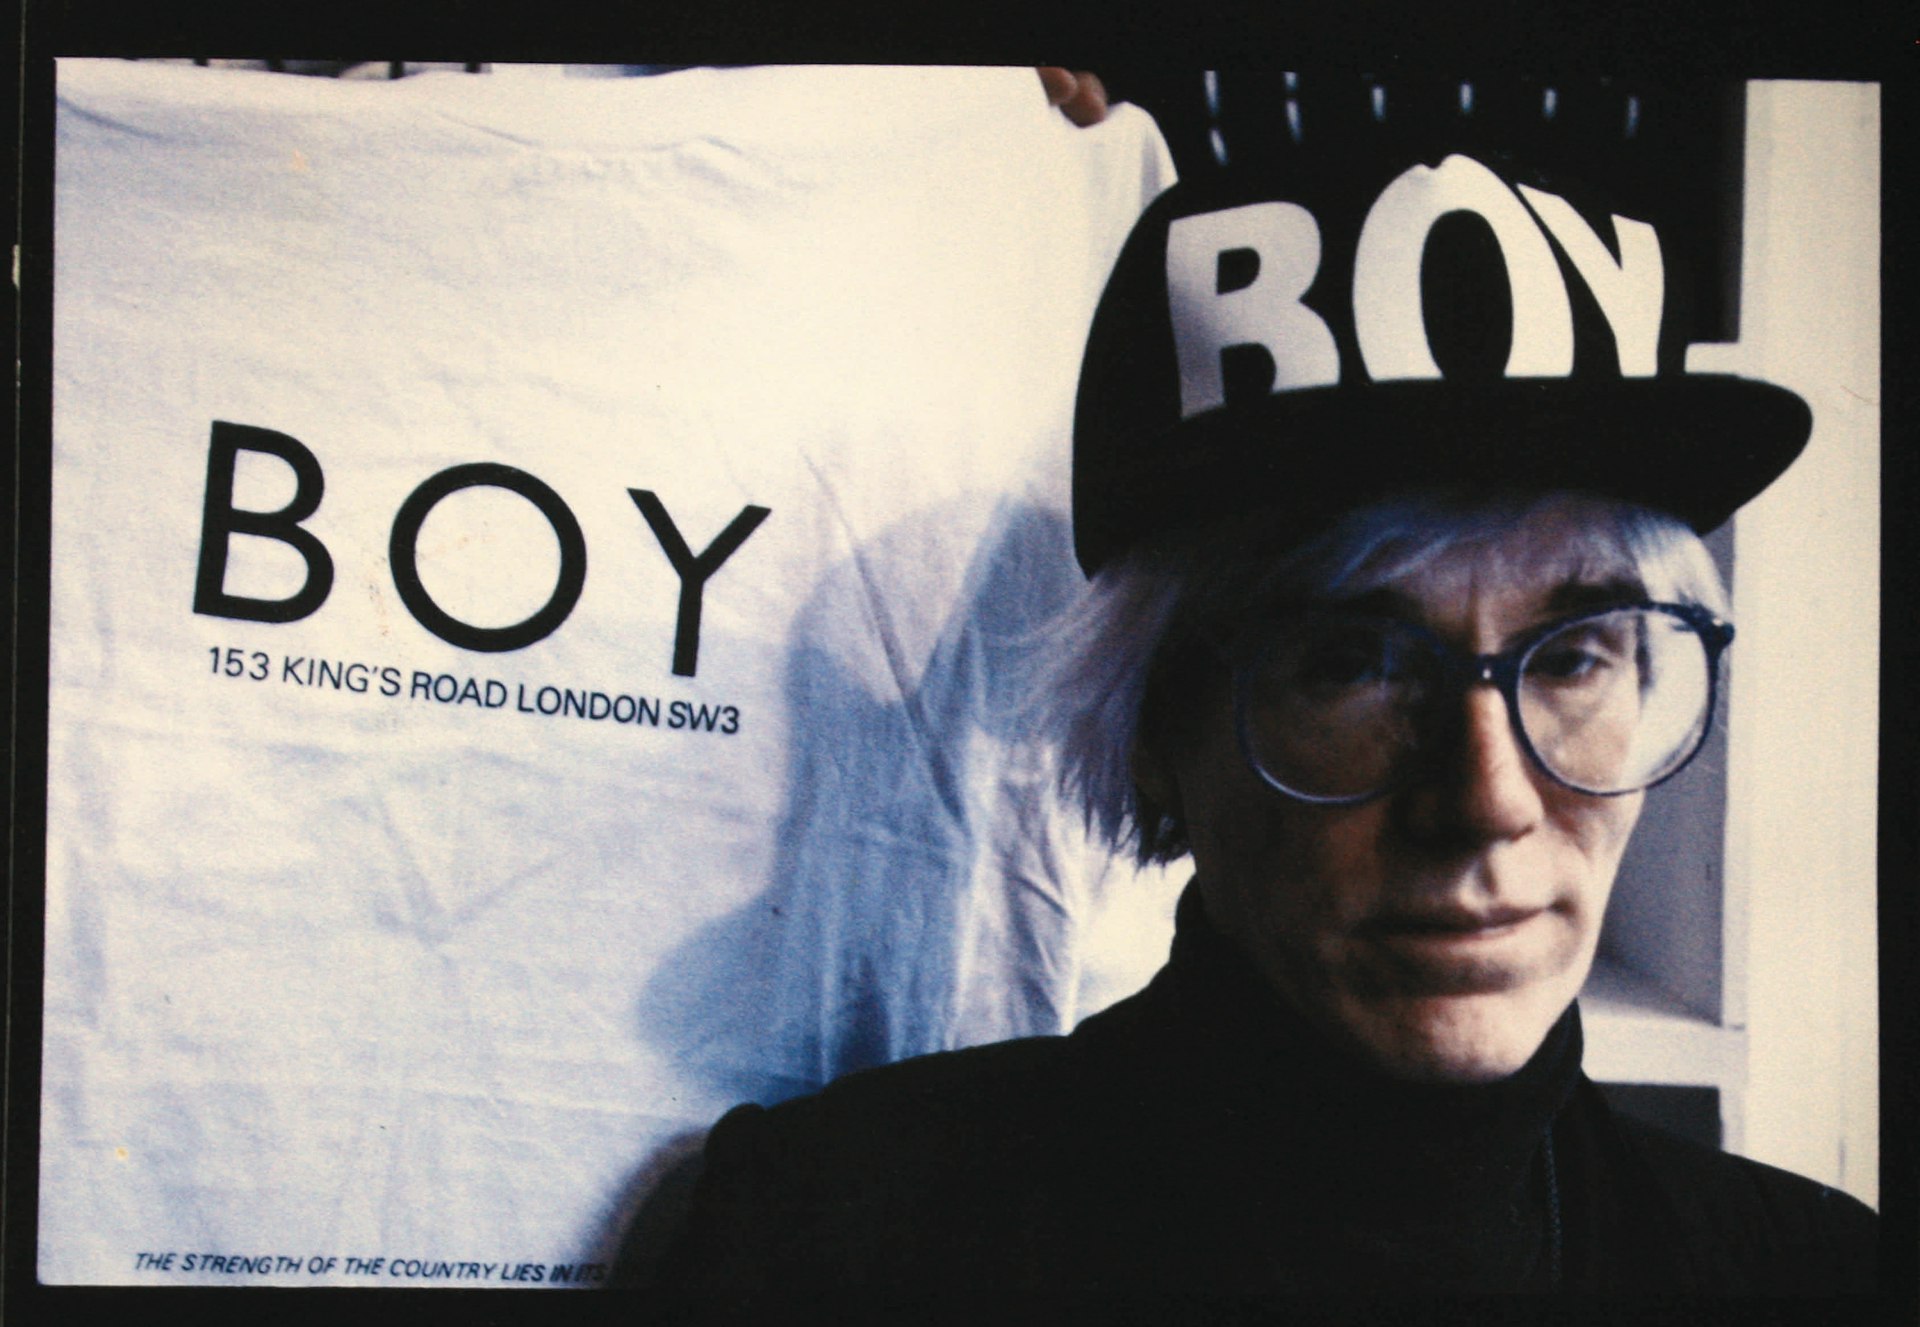 The story behind BOY, the cult London fashion label